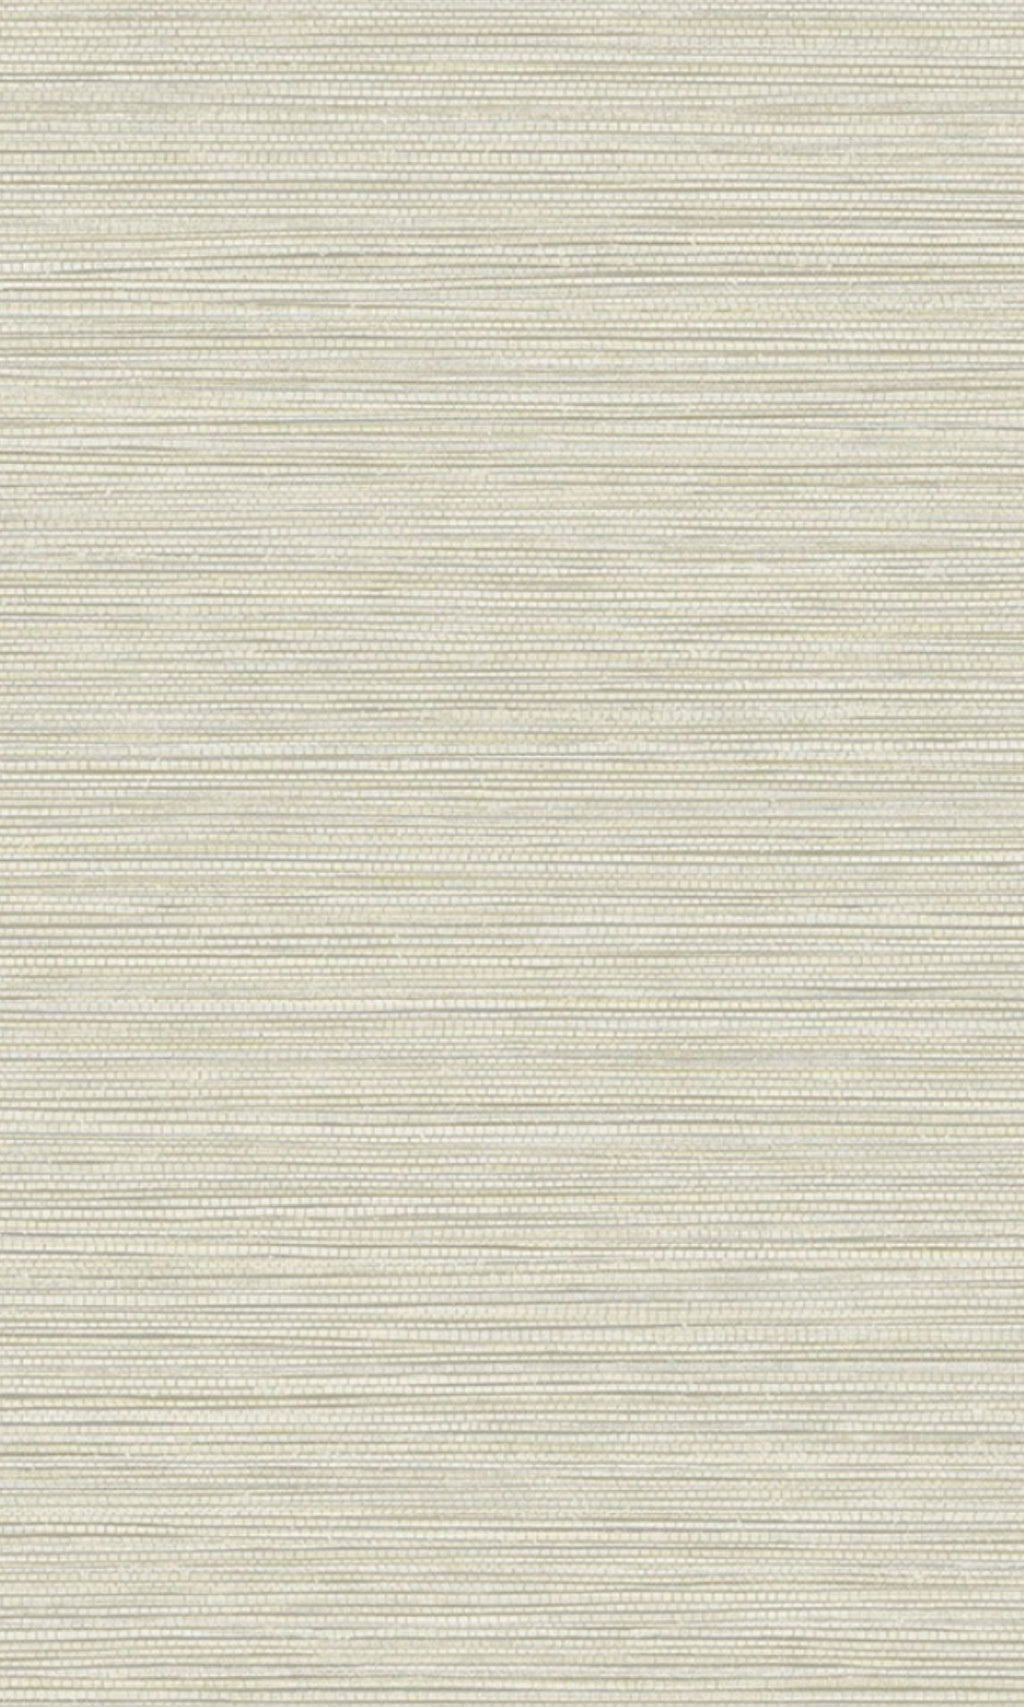 Feather Grass Horizontal Line Vinyl Textured Commercial CPW1002